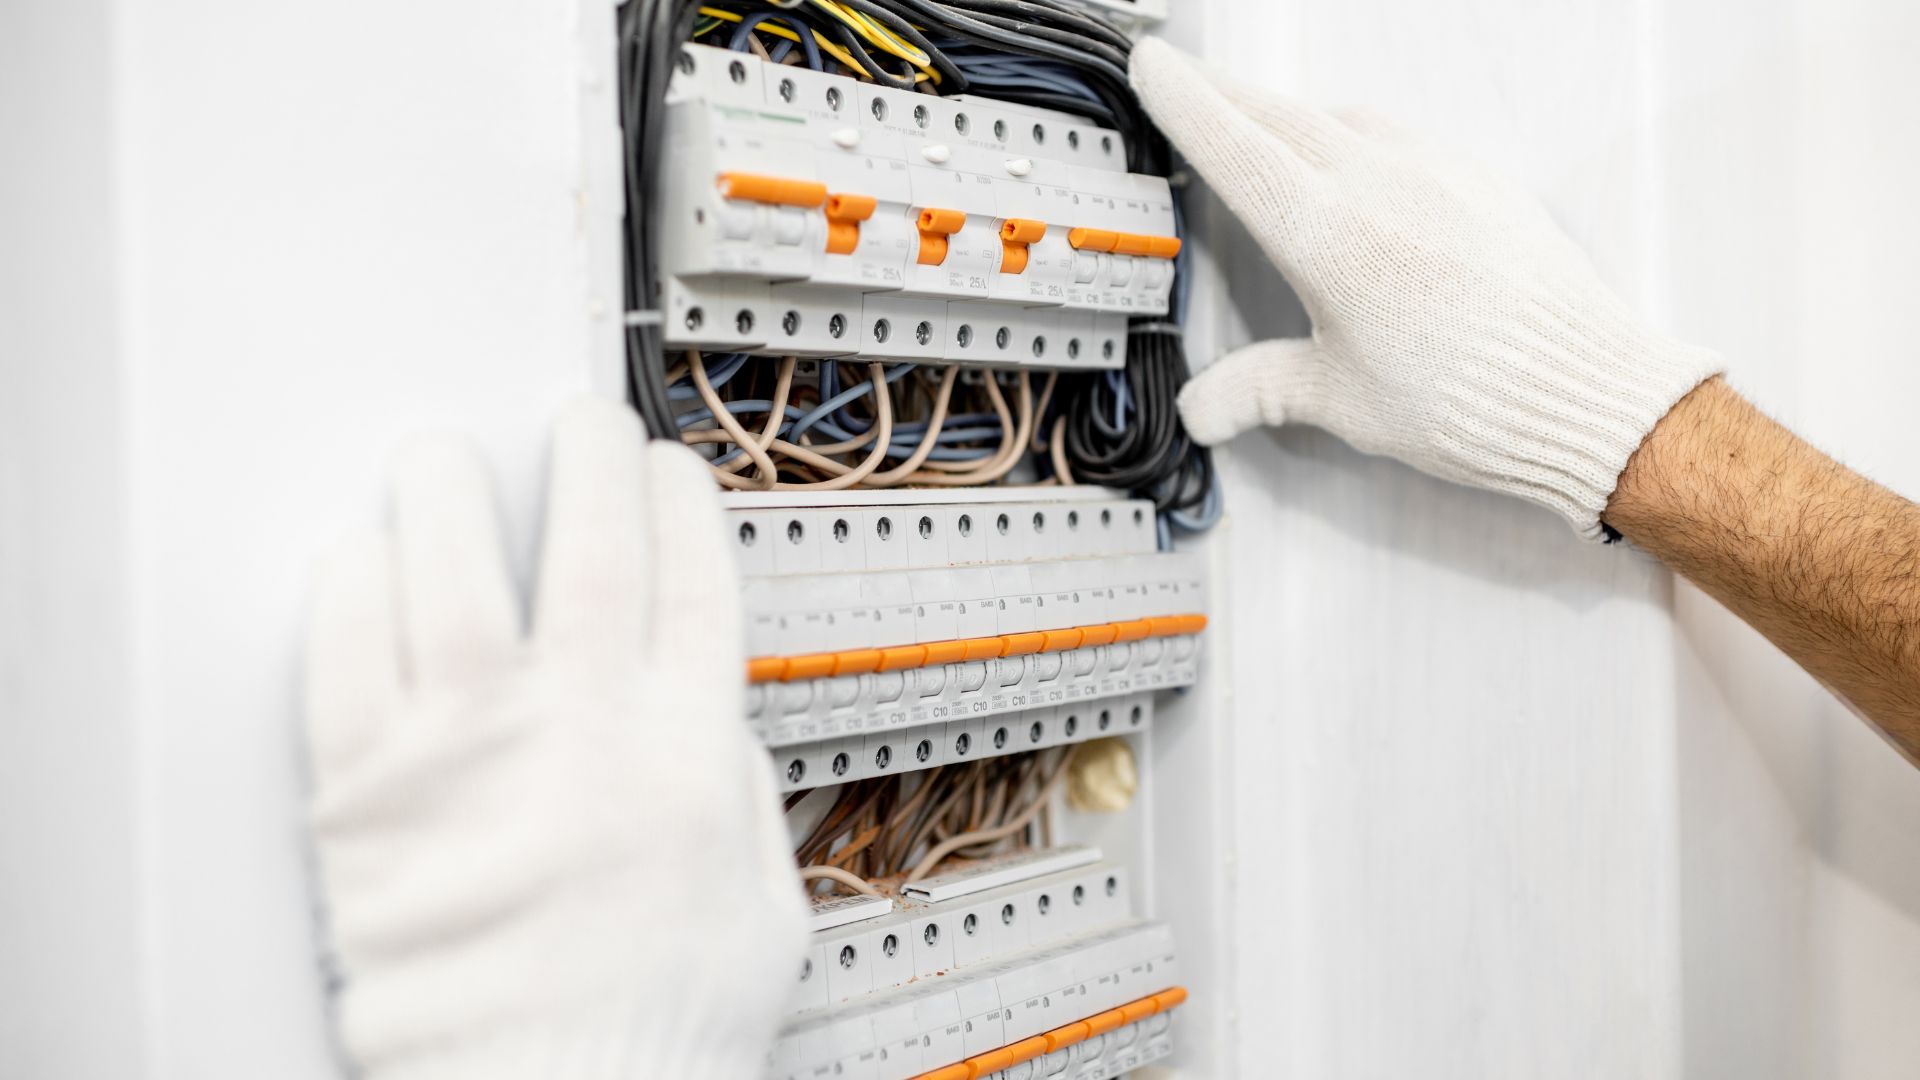 Advantages of Enhancing Your Service Panel: Electrical Services for Improved Power Distribution